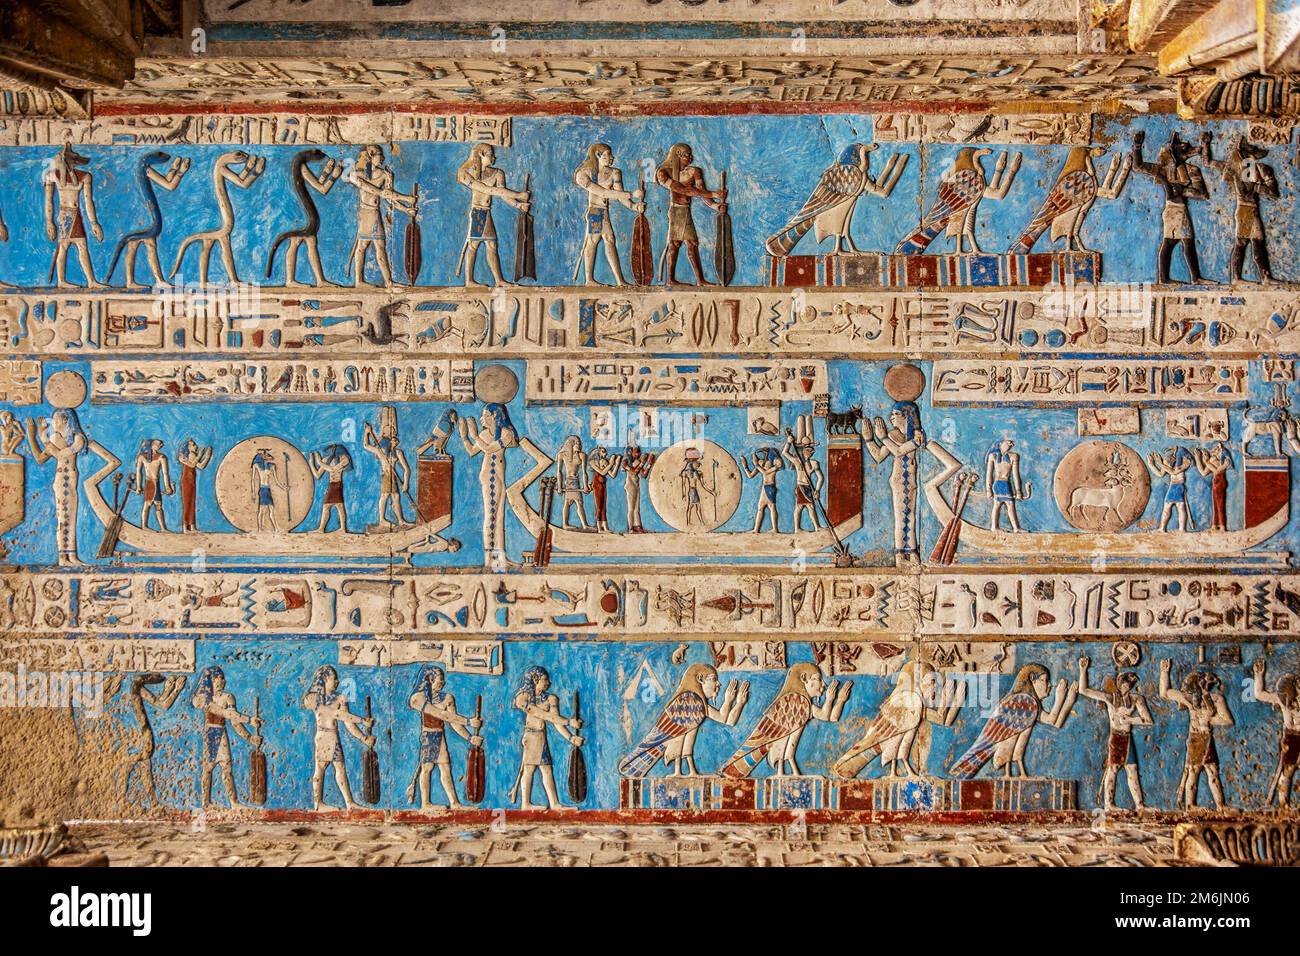 Hieroglyphic carvings in ancient egyptian temple Stock Photo